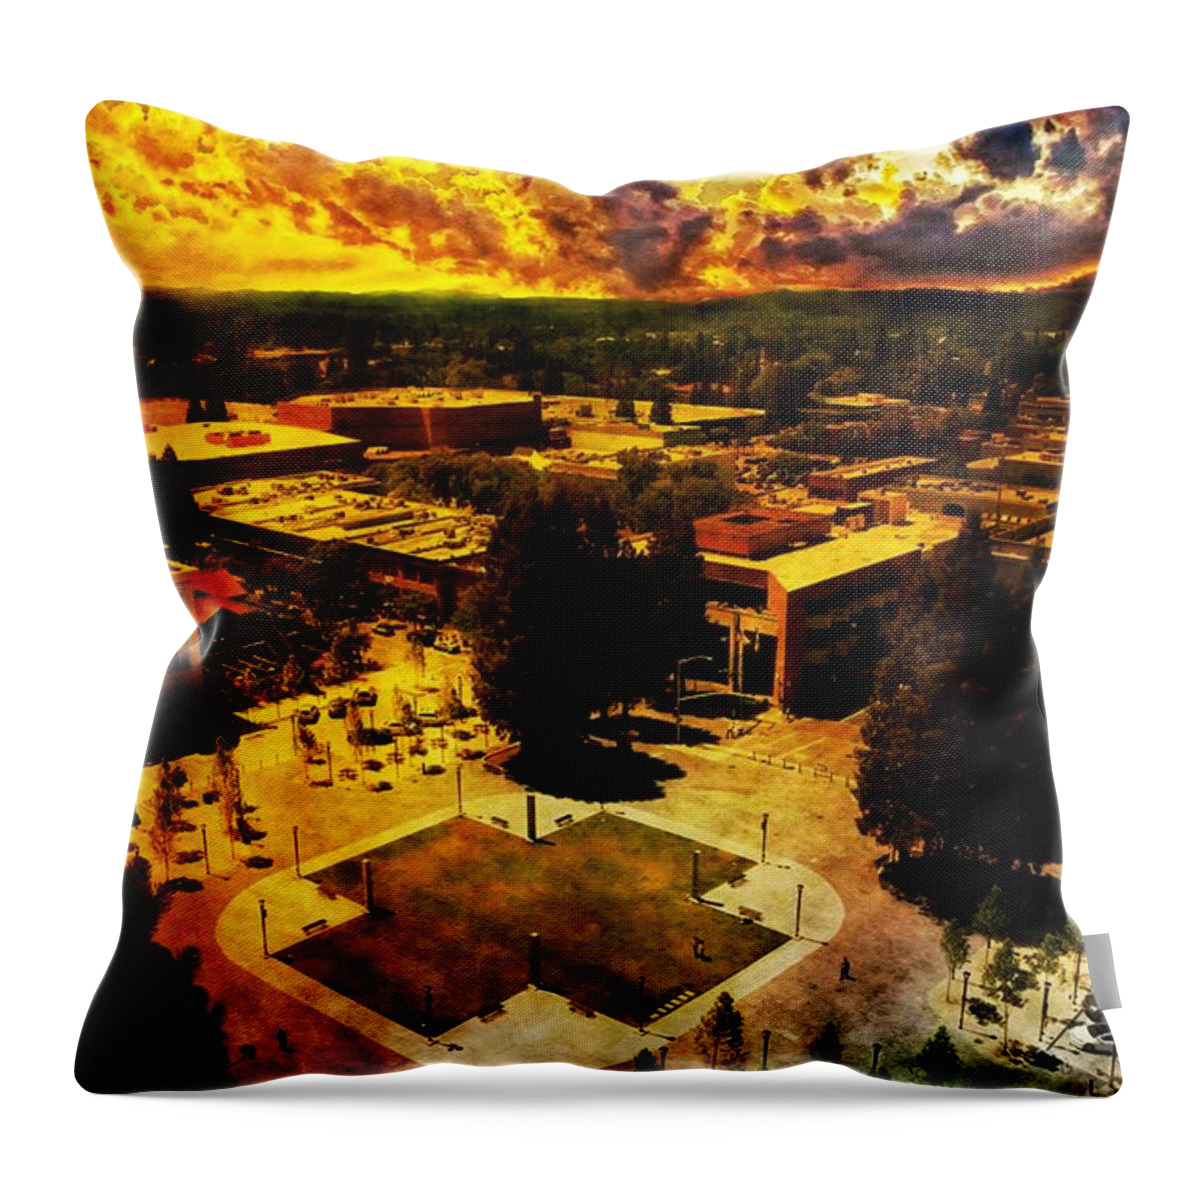 Santa Rosa Throw Pillow featuring the digital art Old Courthouse Square in Santa Rosa, California, seen on sunset by Nicko Prints